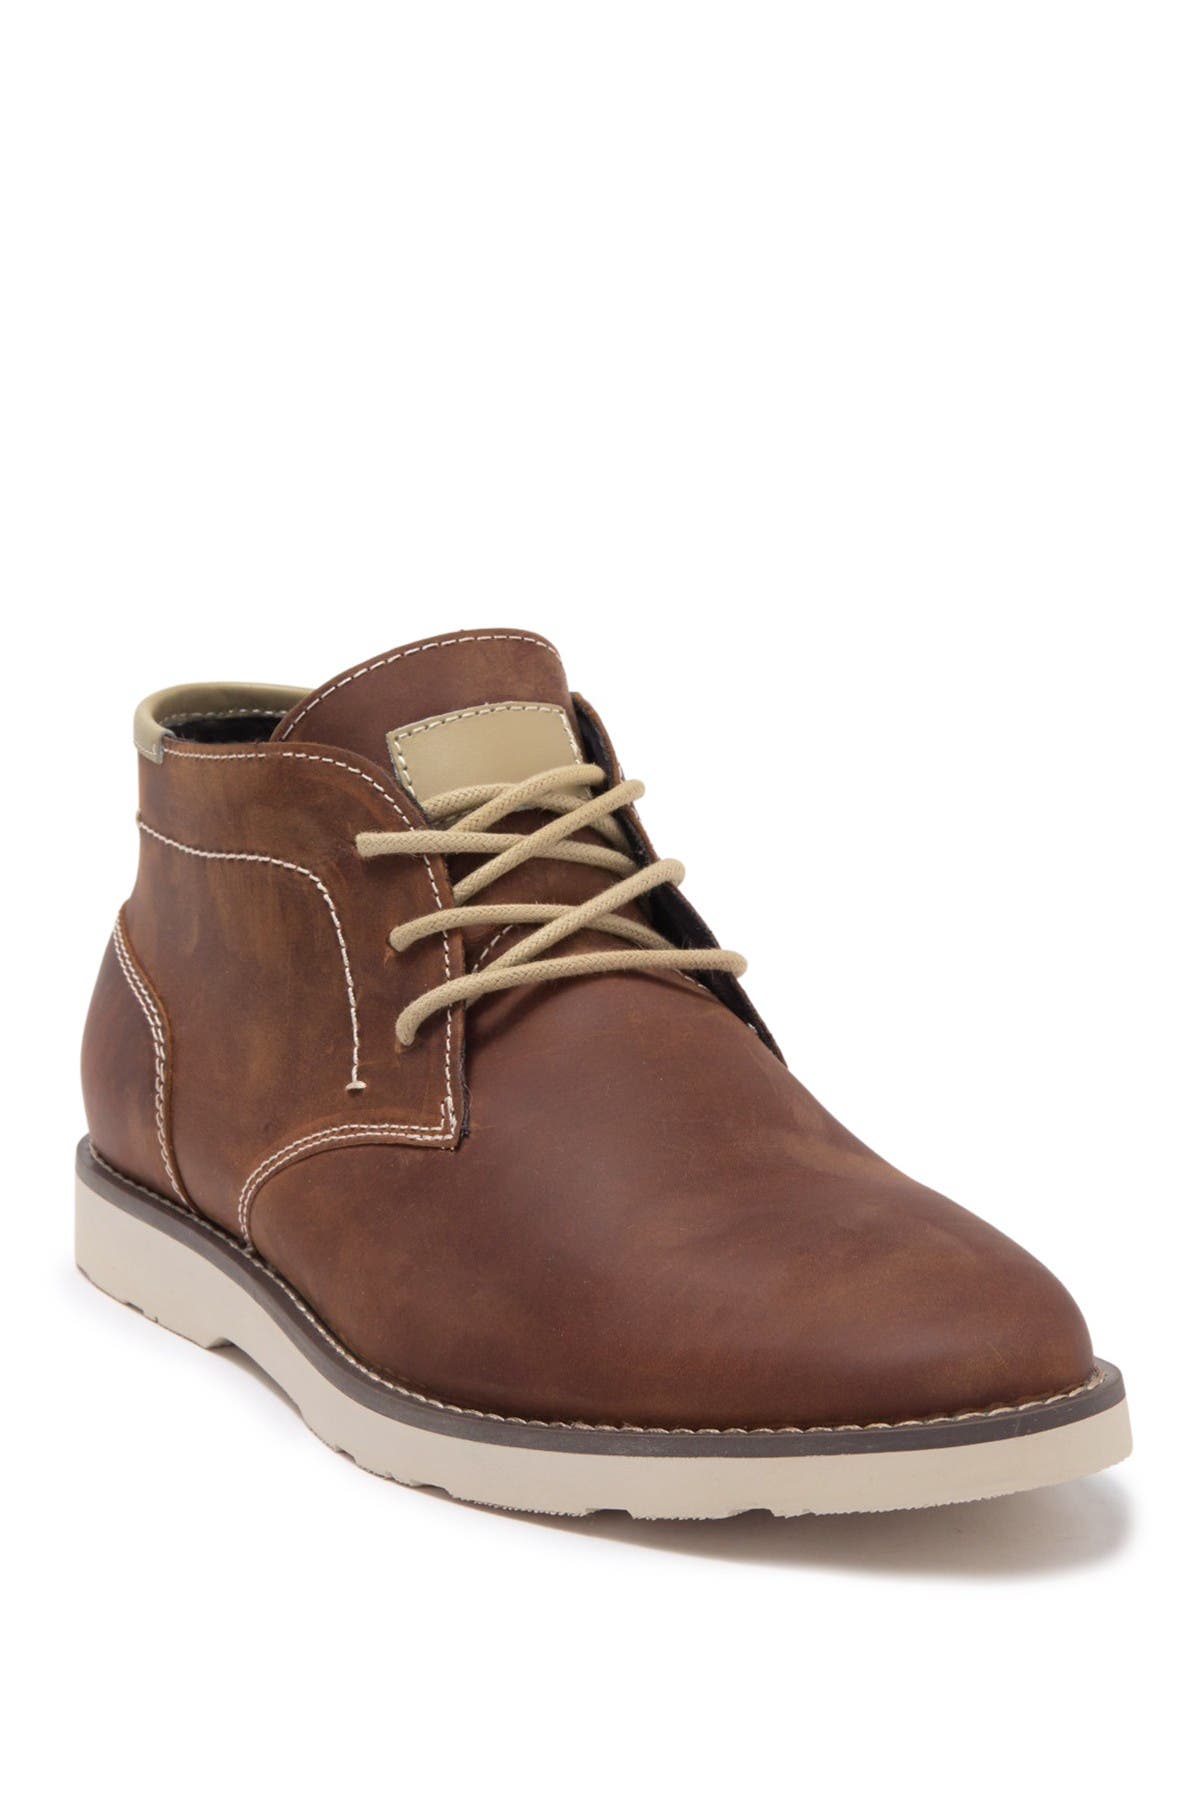 Dr. Scholl's | Freewill Leather Chukka Boot | Nordstrom Rack